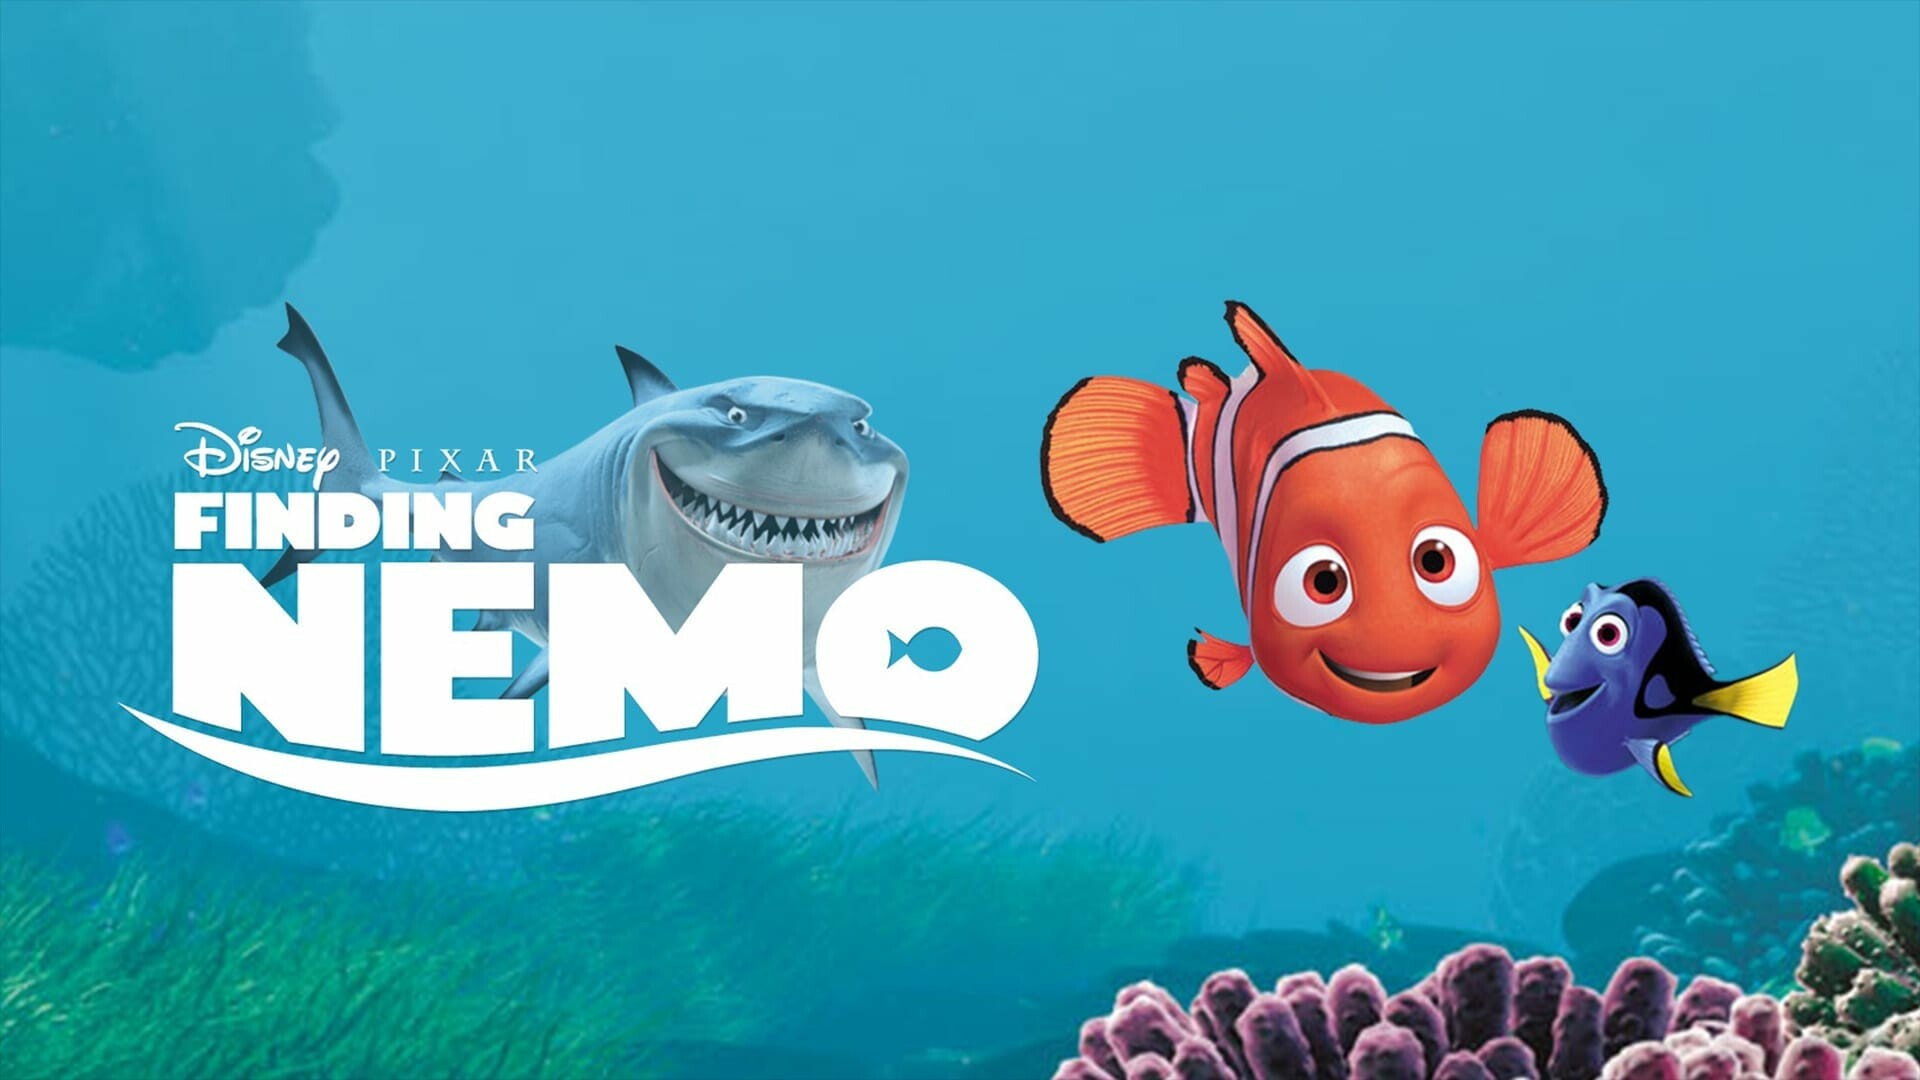 Finding Nemo: Animated film about the lives of undersea creatures, 2003. 1920x1080 Full HD Wallpaper.